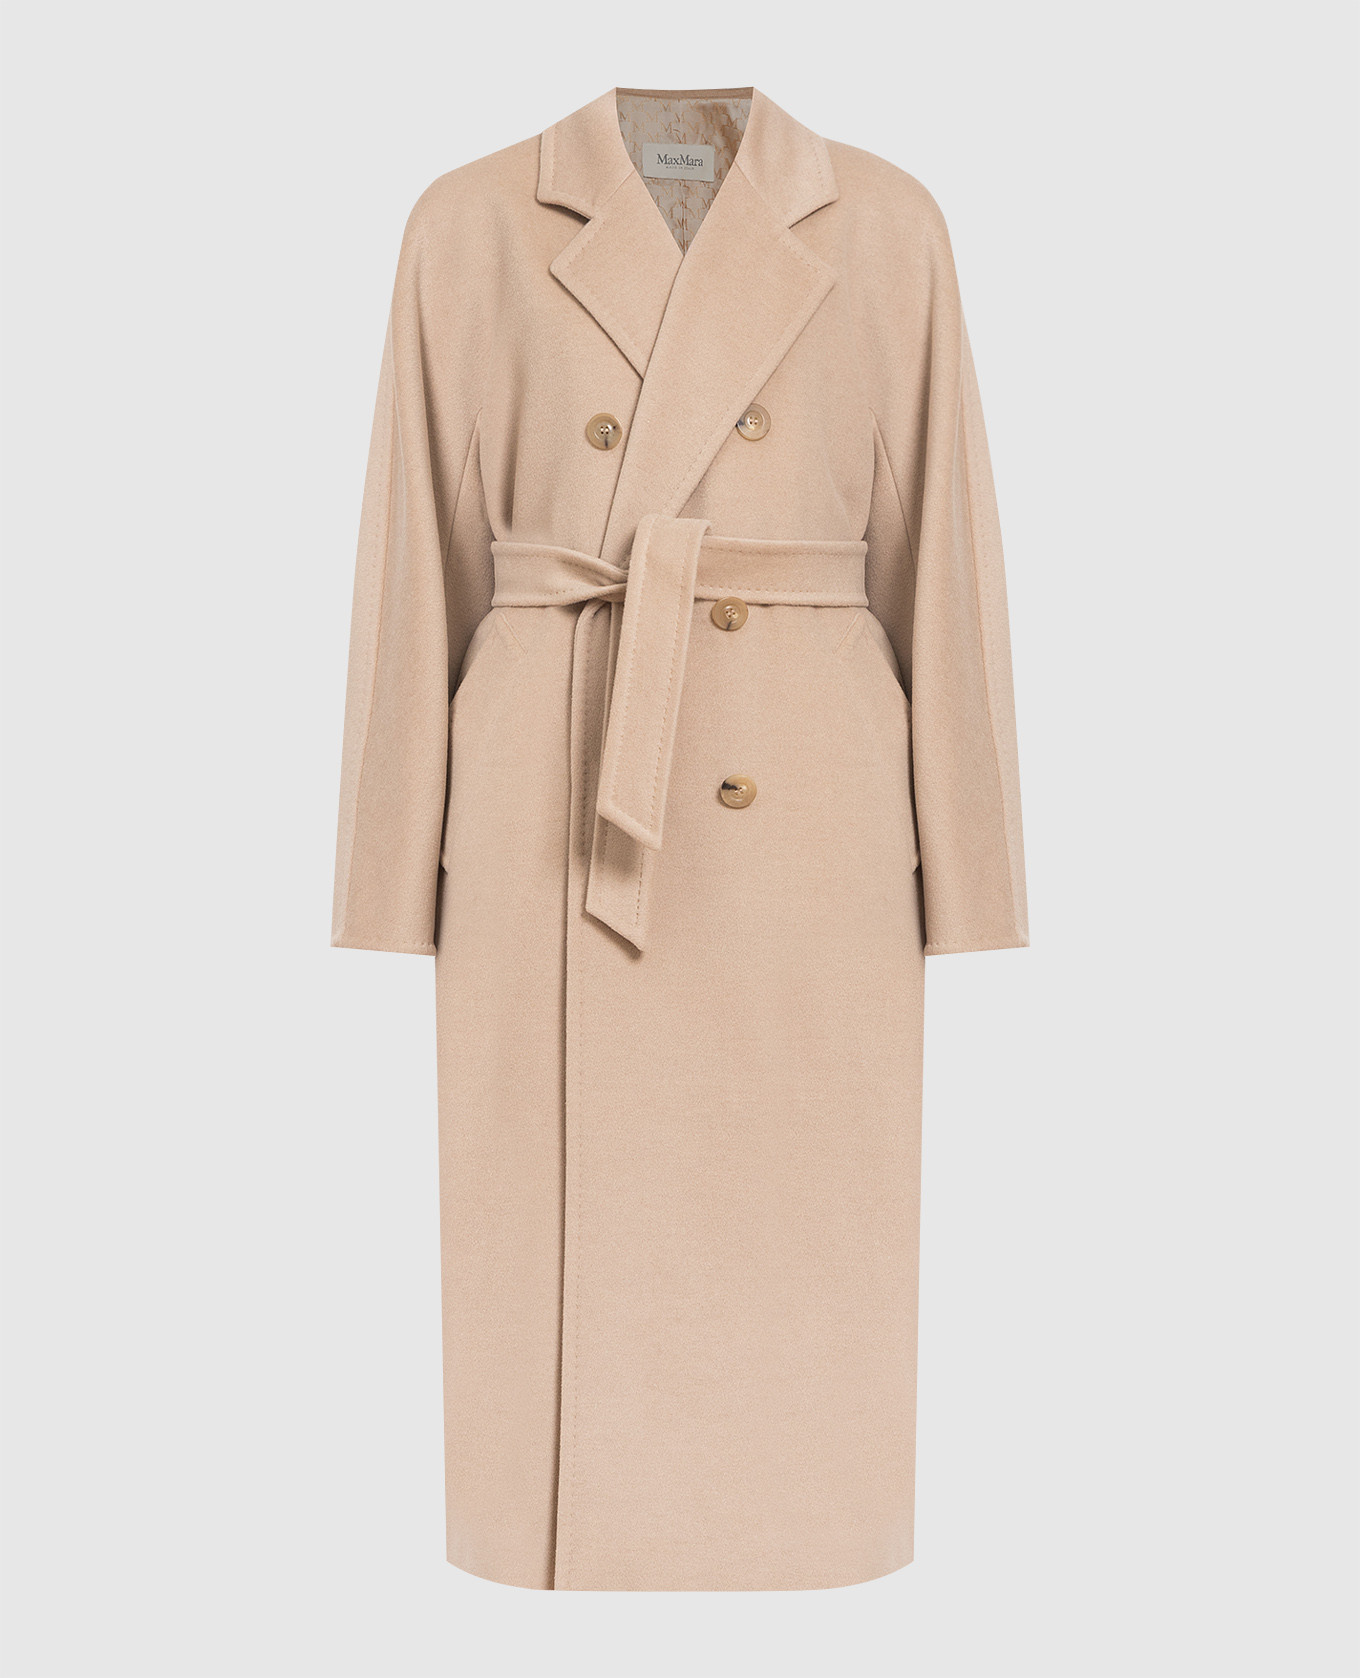 Light beige wool and cashmere coat